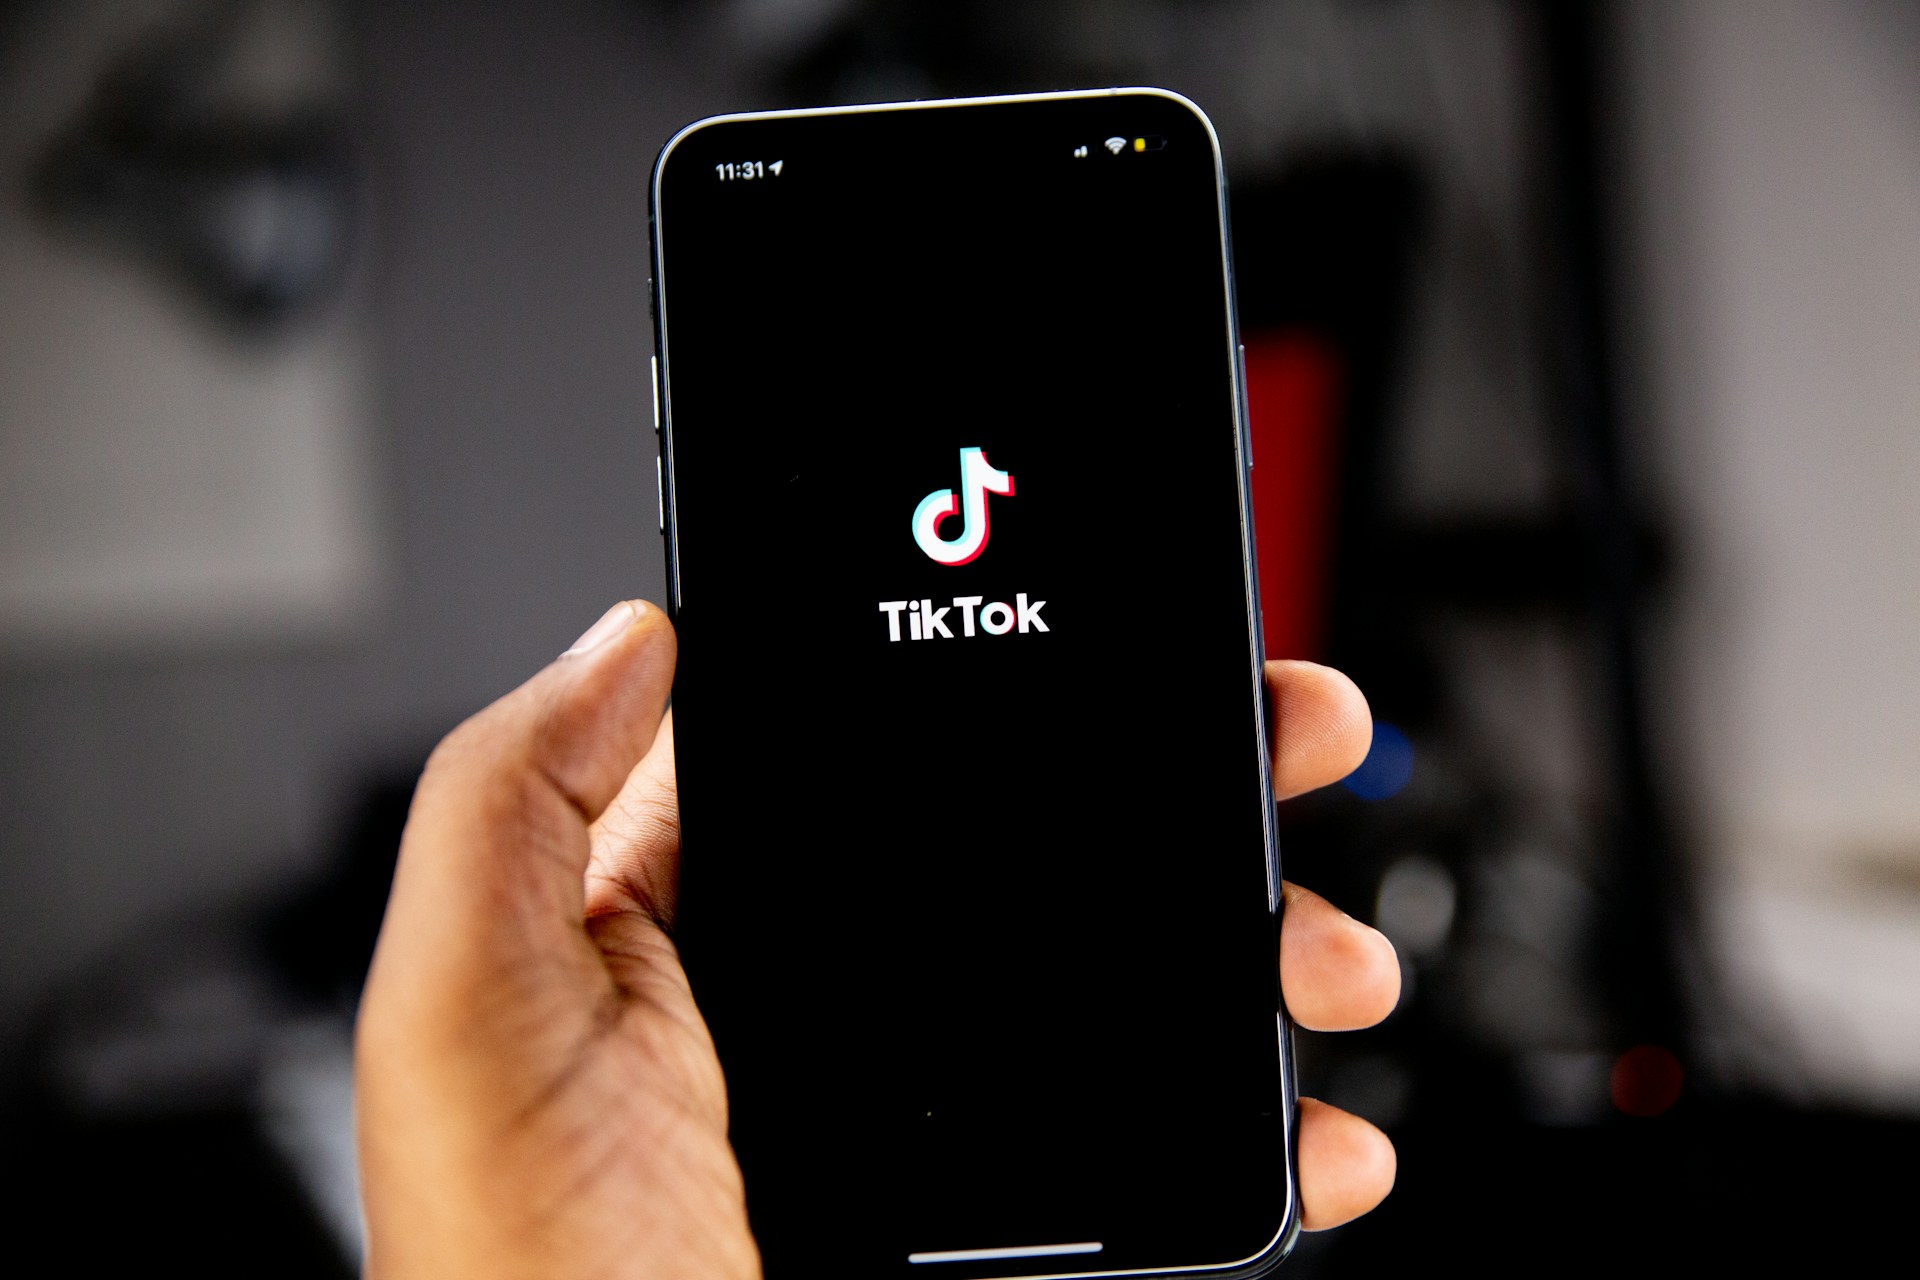 A cell phone with the TikTok app open.